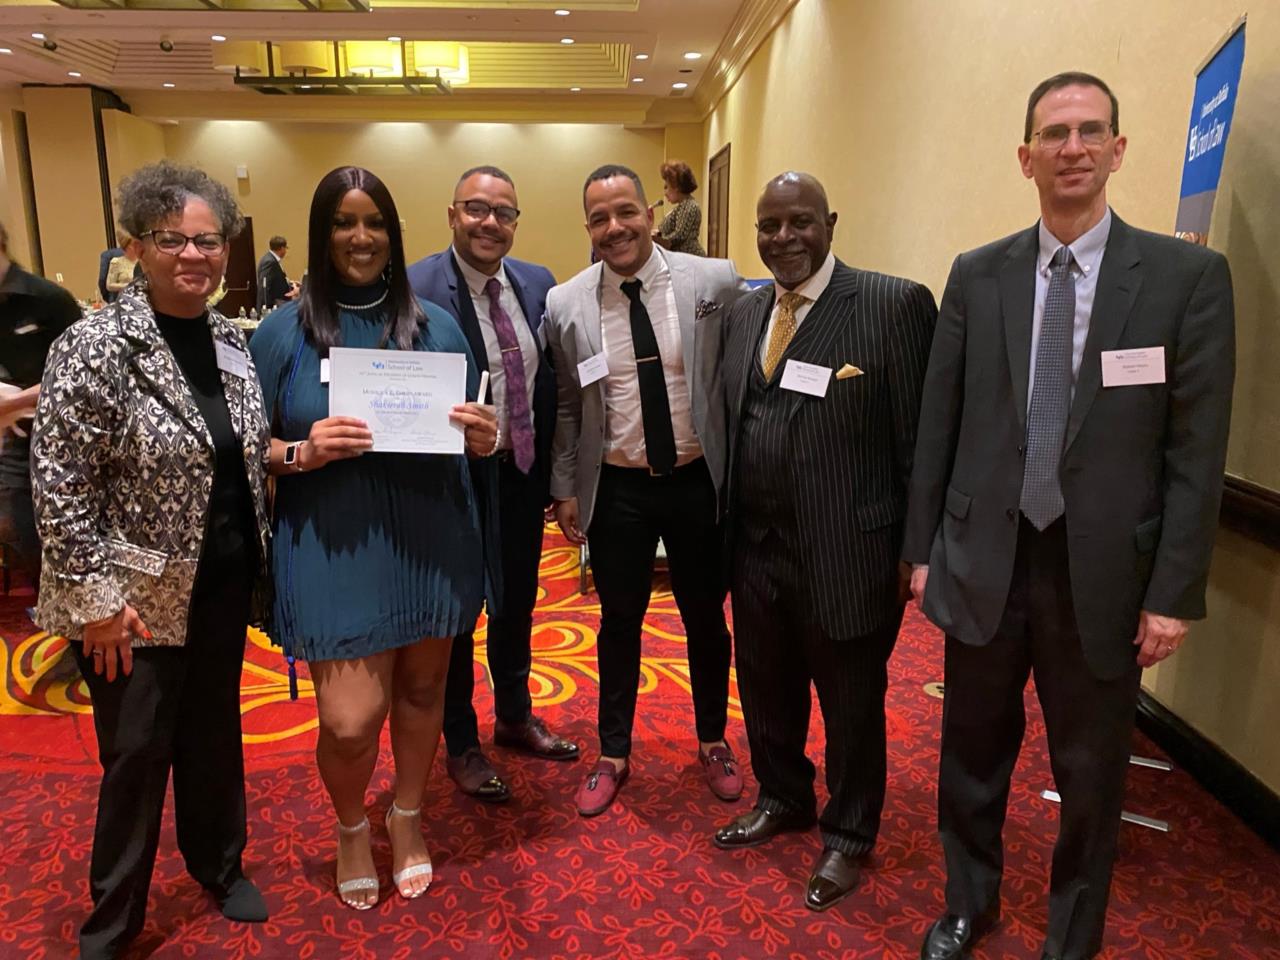 On April 14, 2022, Oliver Young,  of counsel, Corey Auerbach, partner, Ali Fatmi, associate, Bob Heary, partner, and Brendan Diaz, summer associate, attended the University at Buffalo School of Law’s 31st Annual Students of Color Dinner.